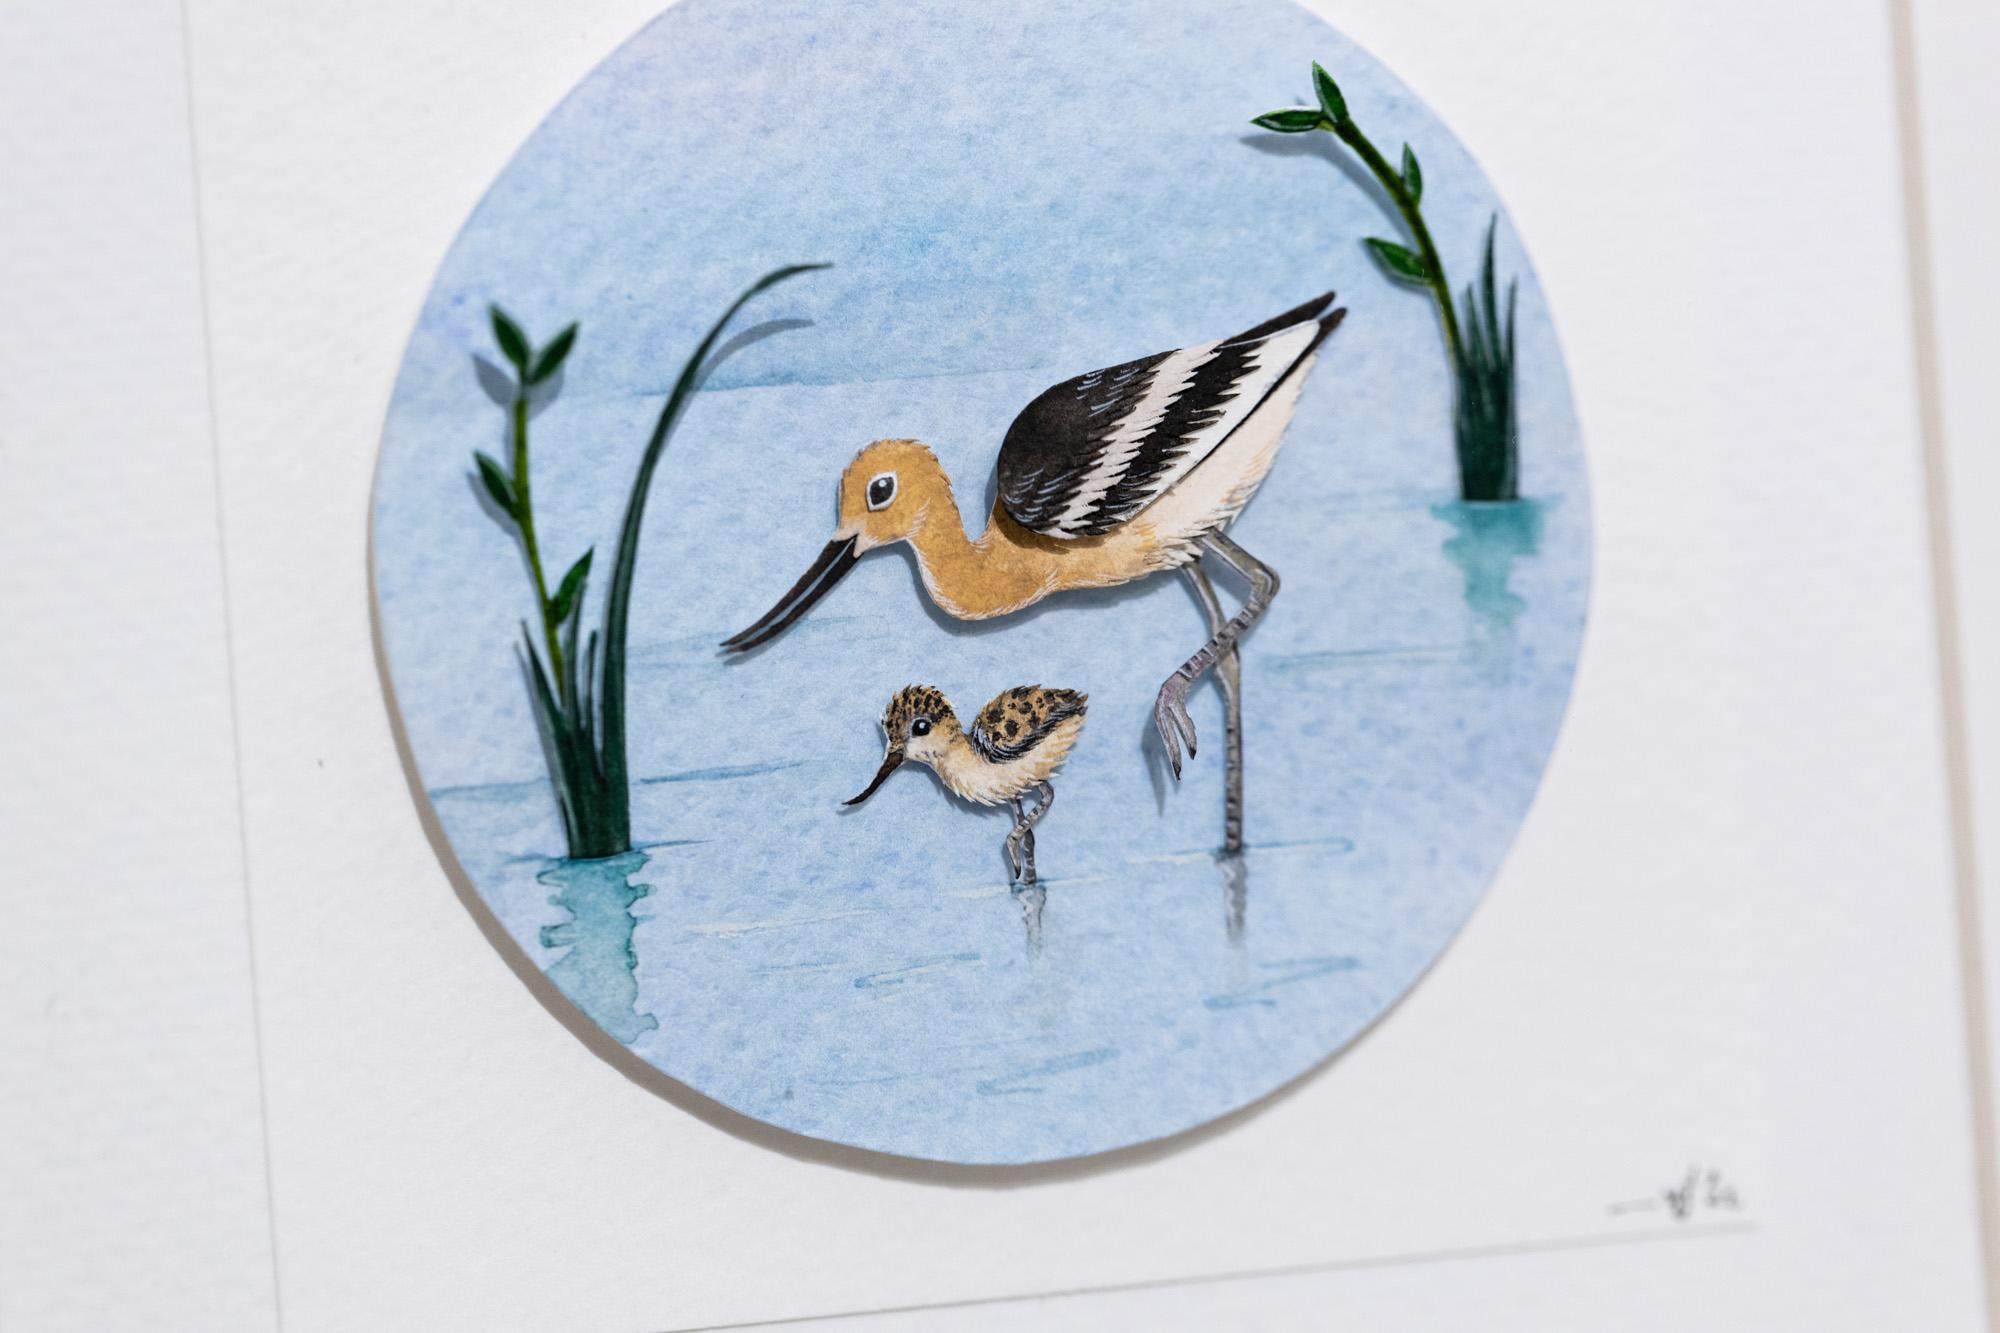 American Avocet with chick - Art by Nayan and Venus